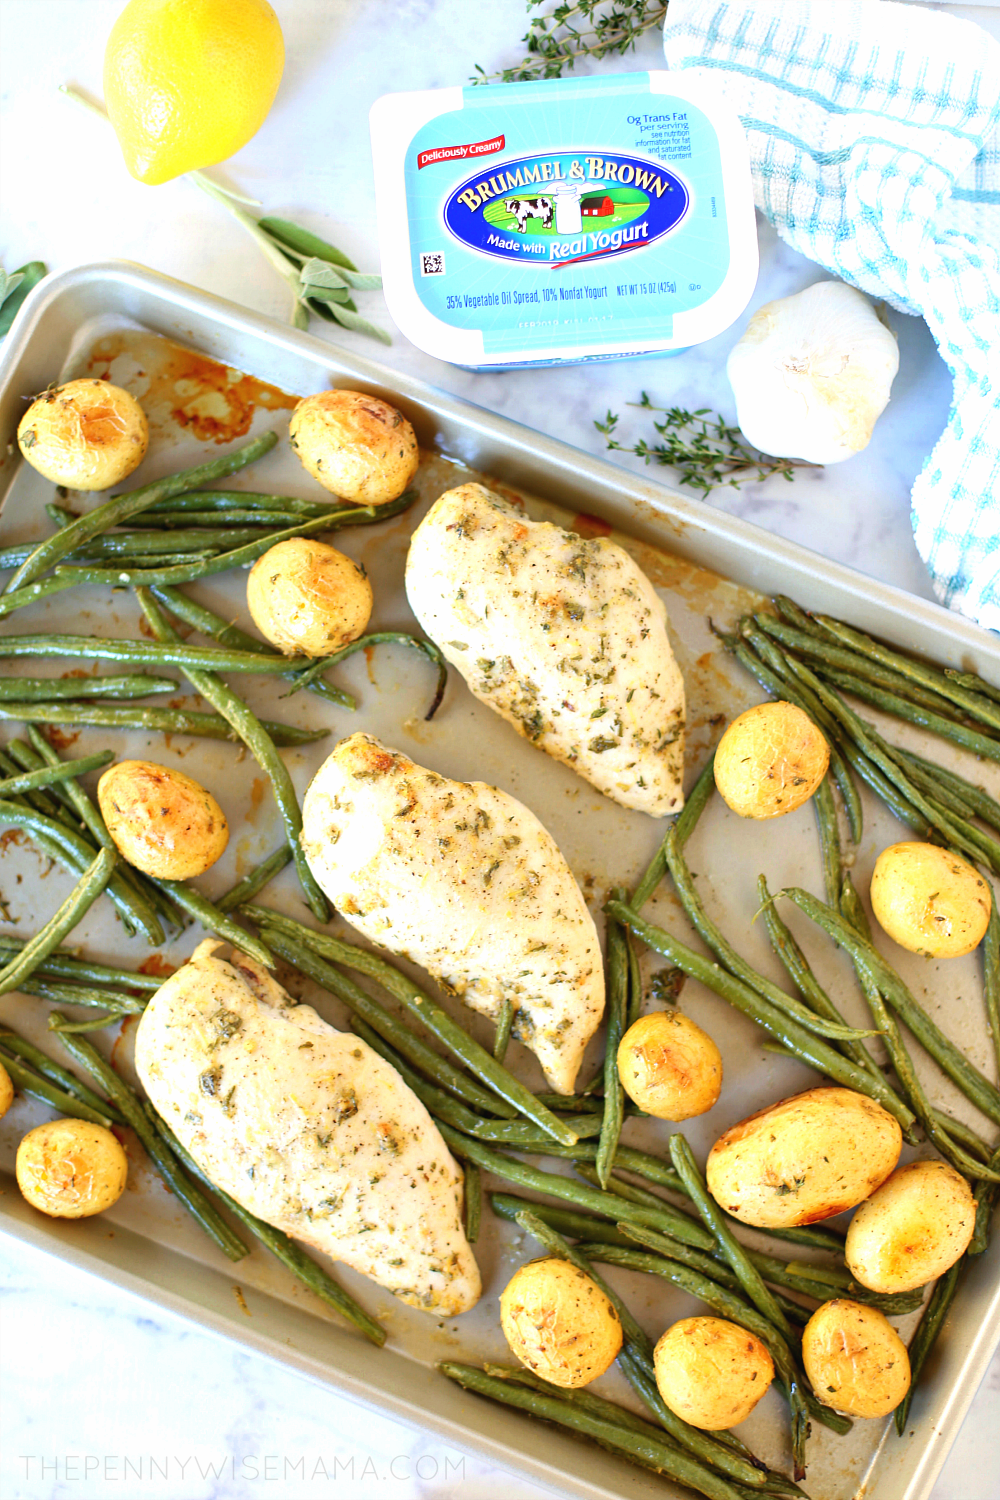 Lemon Garlic Herb Sheet Pan Chicken - Buttery & Full of Flavor with Less Fat and Calories